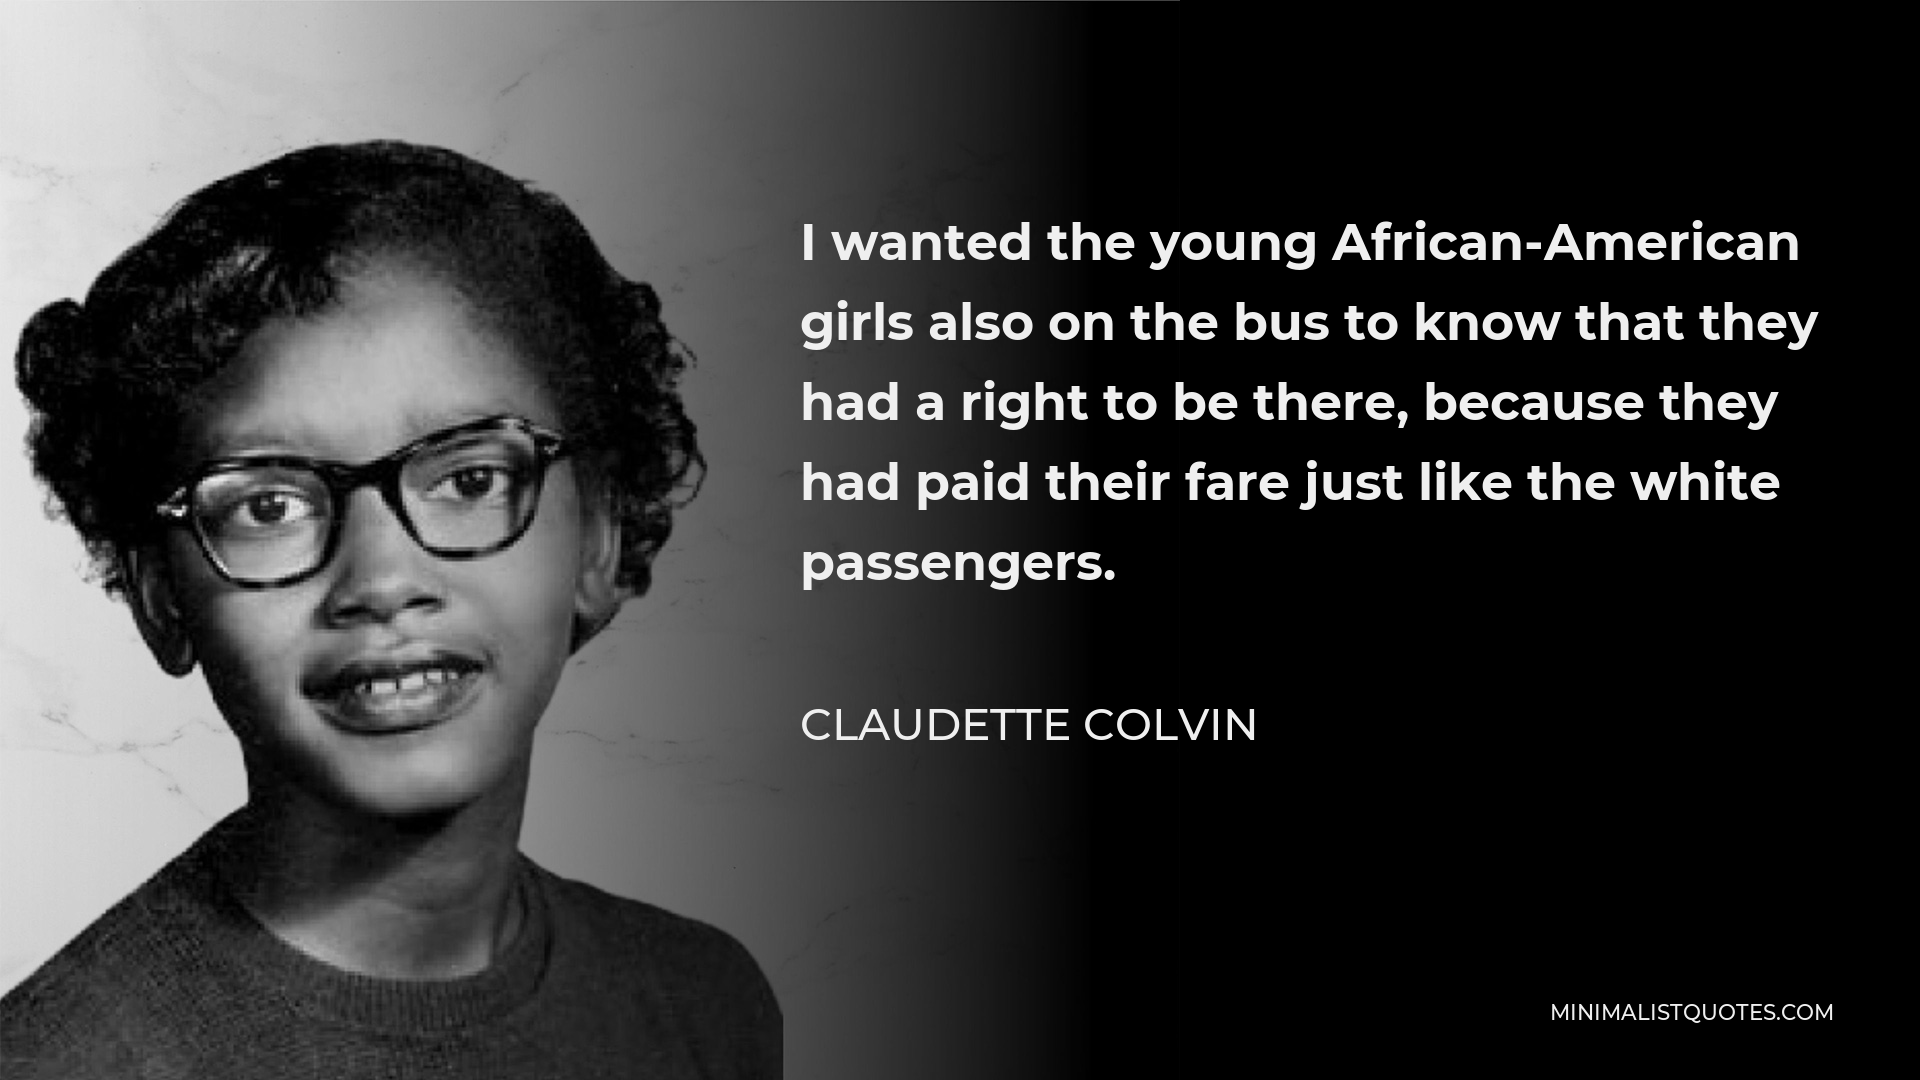 Claudette Colvin Quote - I wanted the young African-American girls also on the bus to know that they had a right to be there, because they had paid their fare just like the white passengers.